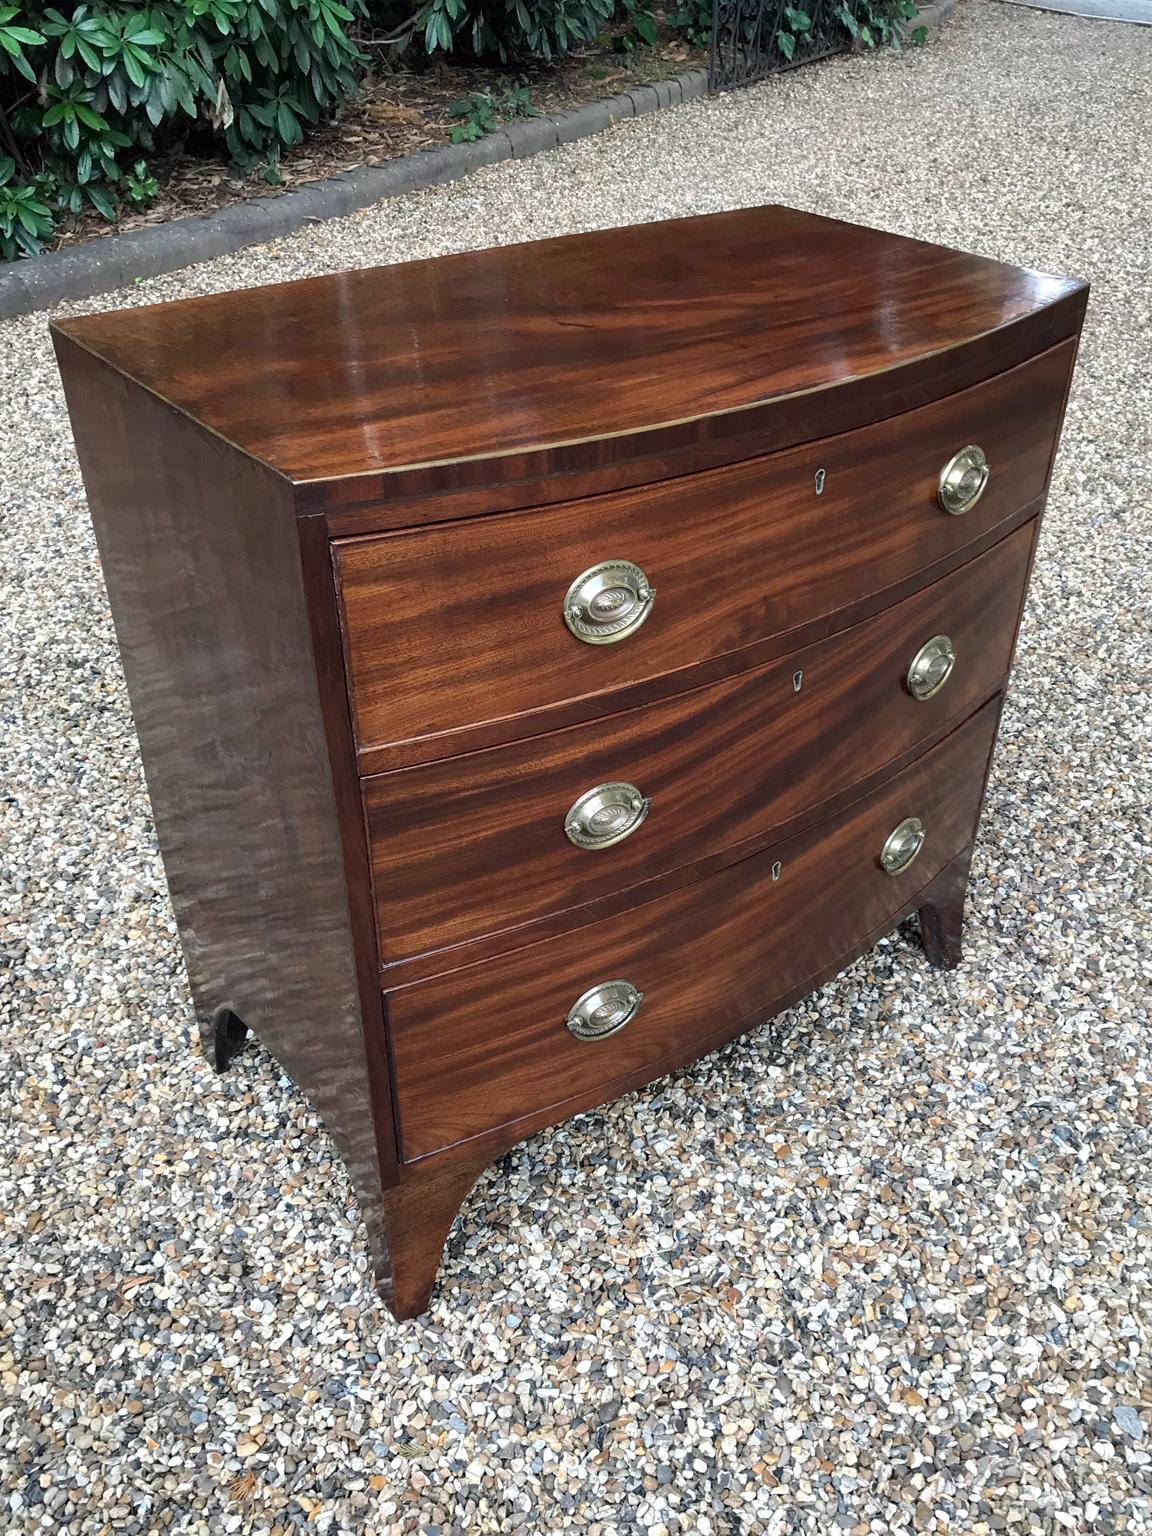 A Georgian mahogany bowfront chest of drawers of three long drawers and brass oval handles on splayed feet

circa 1790–1820

Dimensions:
Width: 33 inches – 84 cms
Depth: 17 inches – 43 cms
Height: 33 inches – 84 cms.

 